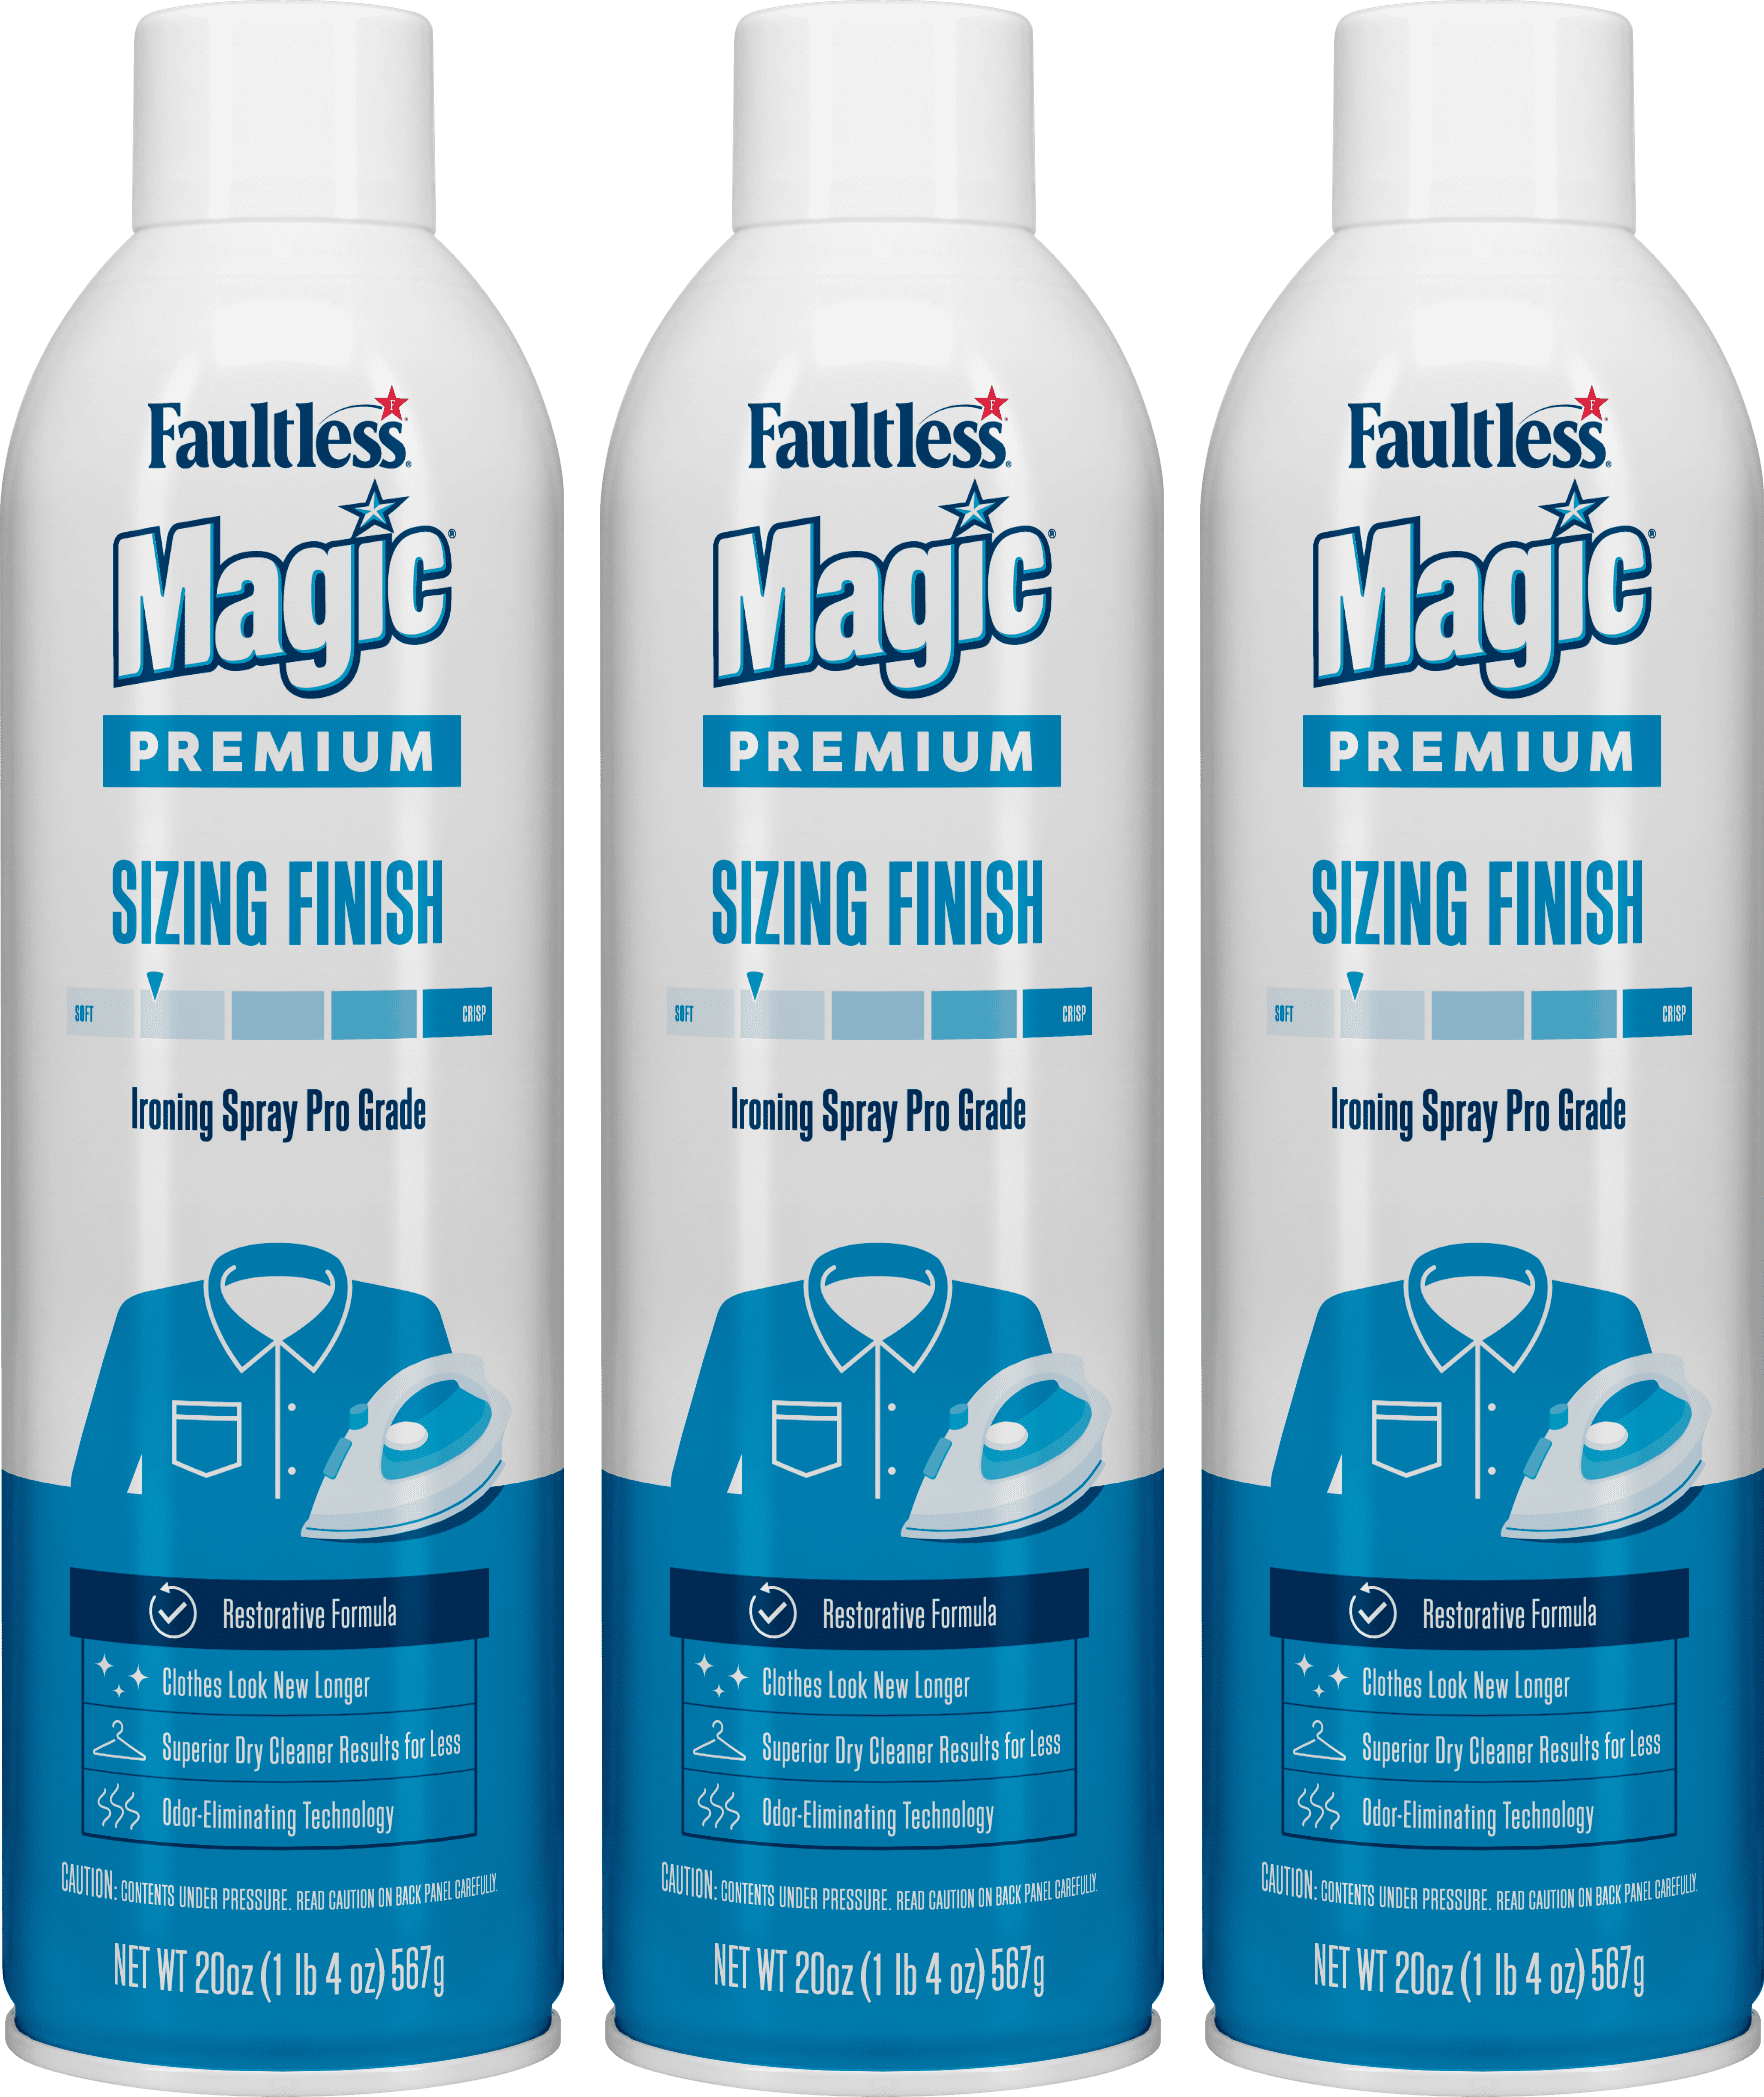 2x Faultless Starch Magic Sizing Light Finish Ironing Spray 20 0z - (Pack  of 2)